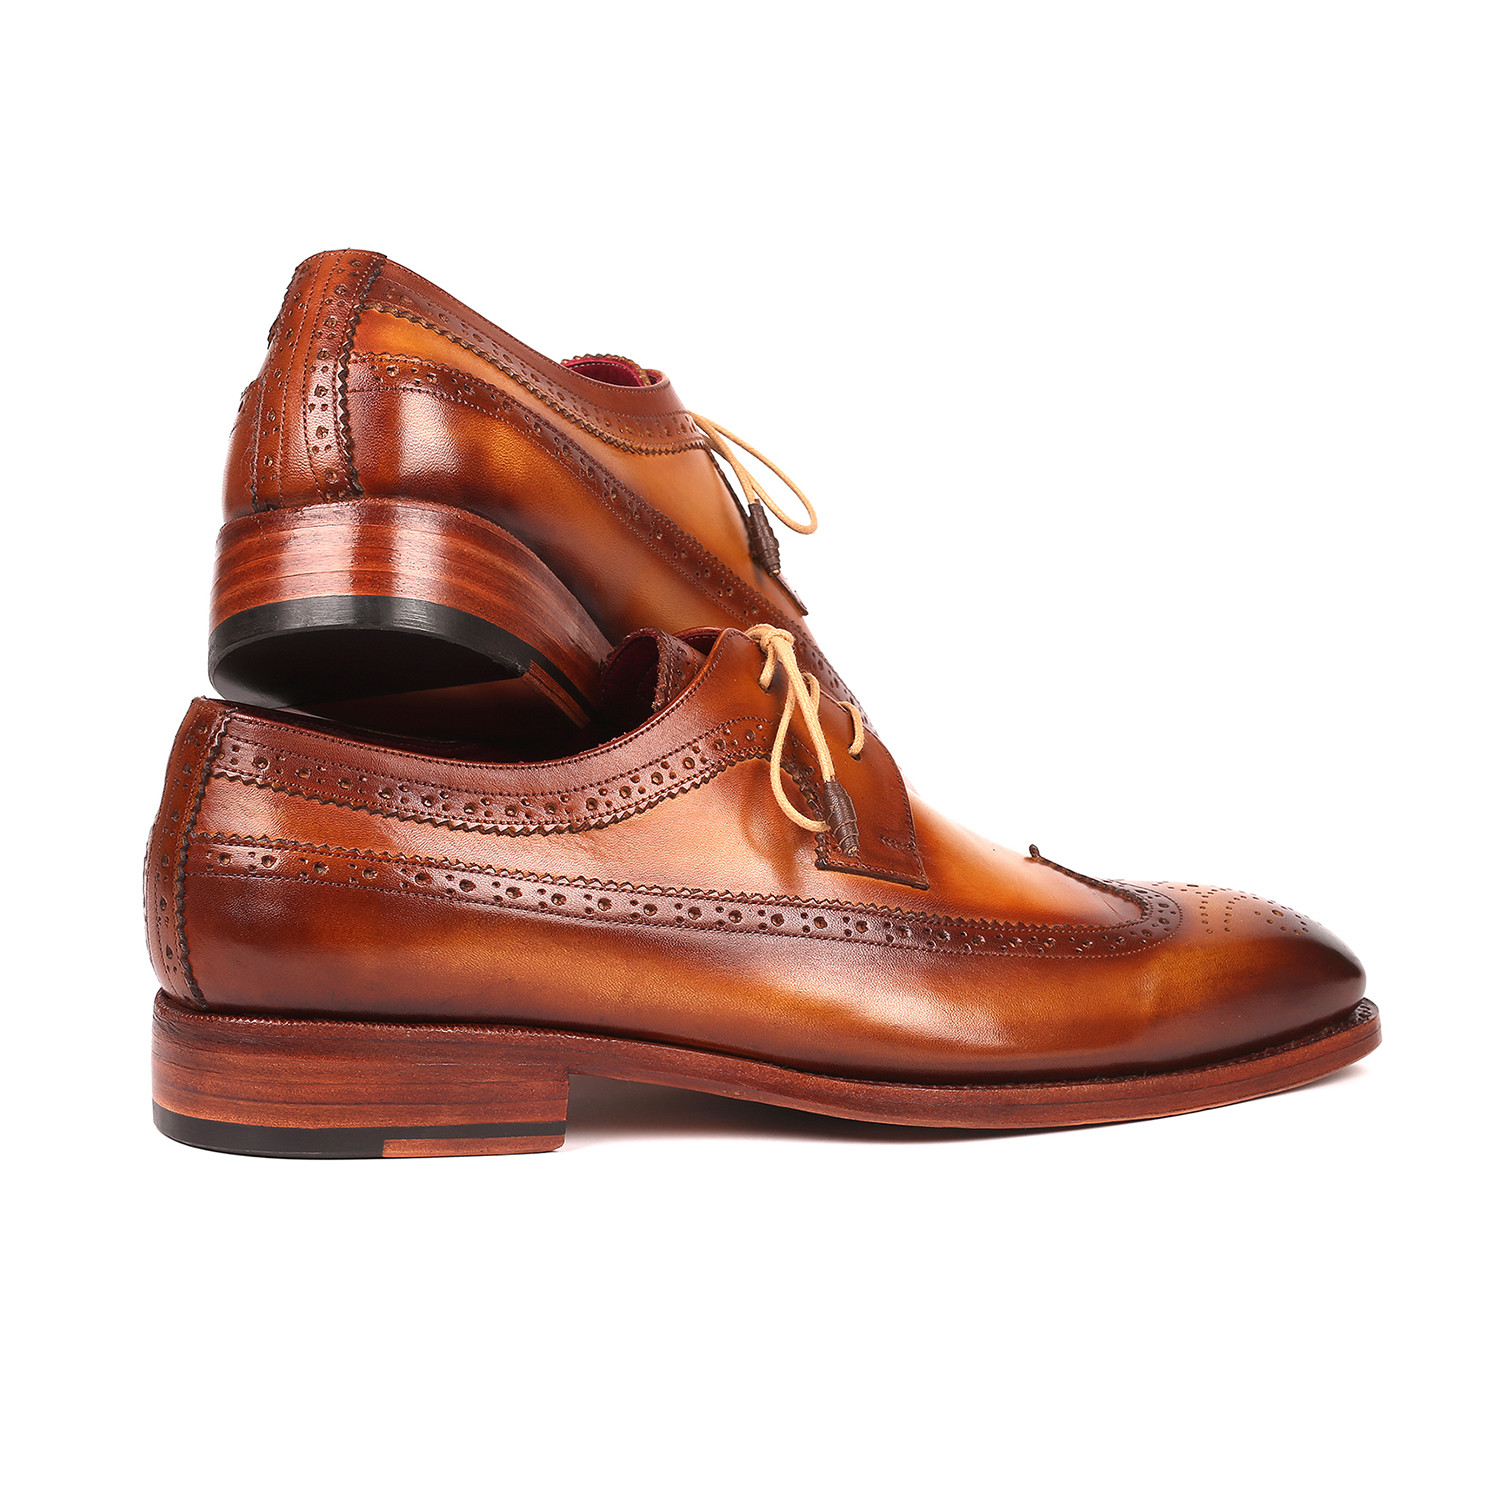 Goodyear Welted Wingtip Derby Shoes // Camel (Euro: 40) - Paul Parkman ...